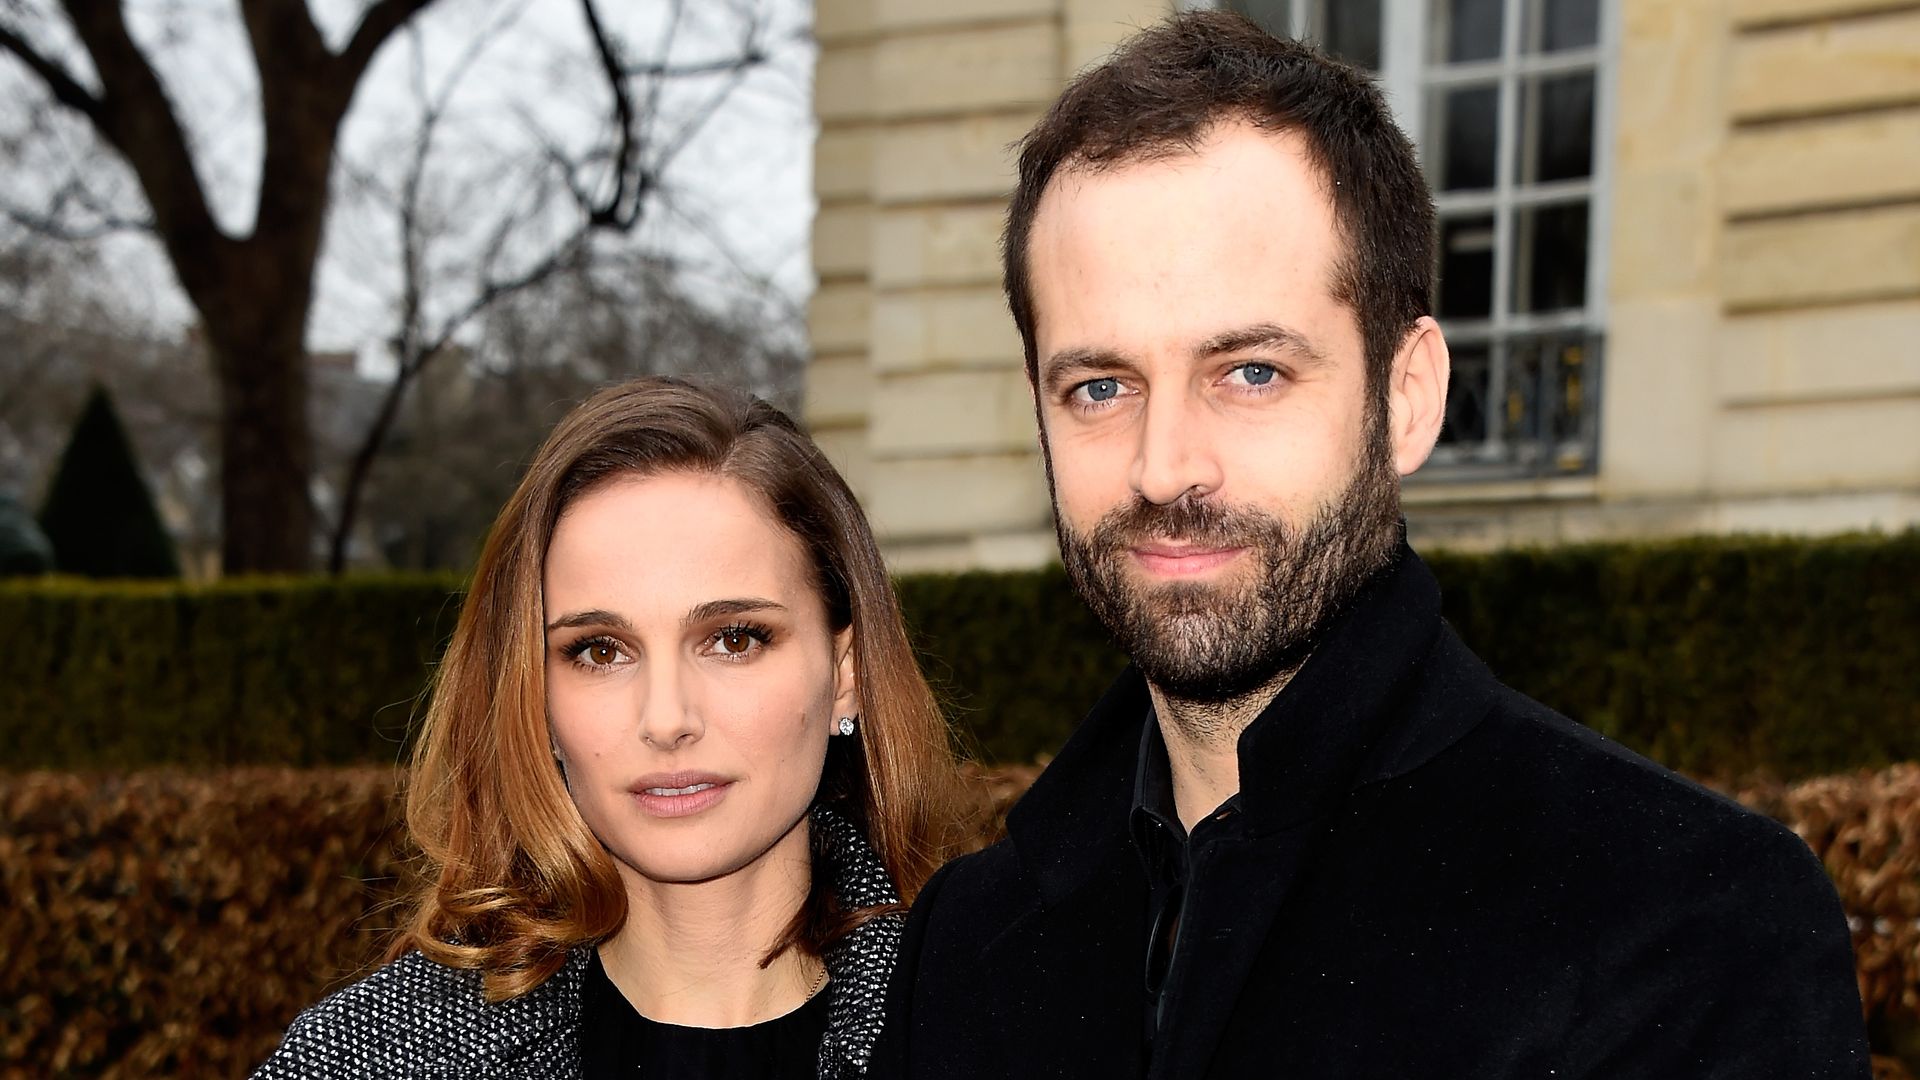 Actress Natalie Portman and her husband Benjamin Millepied attend the Christian Dior show as part of Paris Fashion Week Haute Couture Spring/Summer 2015 on January 26, 2015 in Paris, France